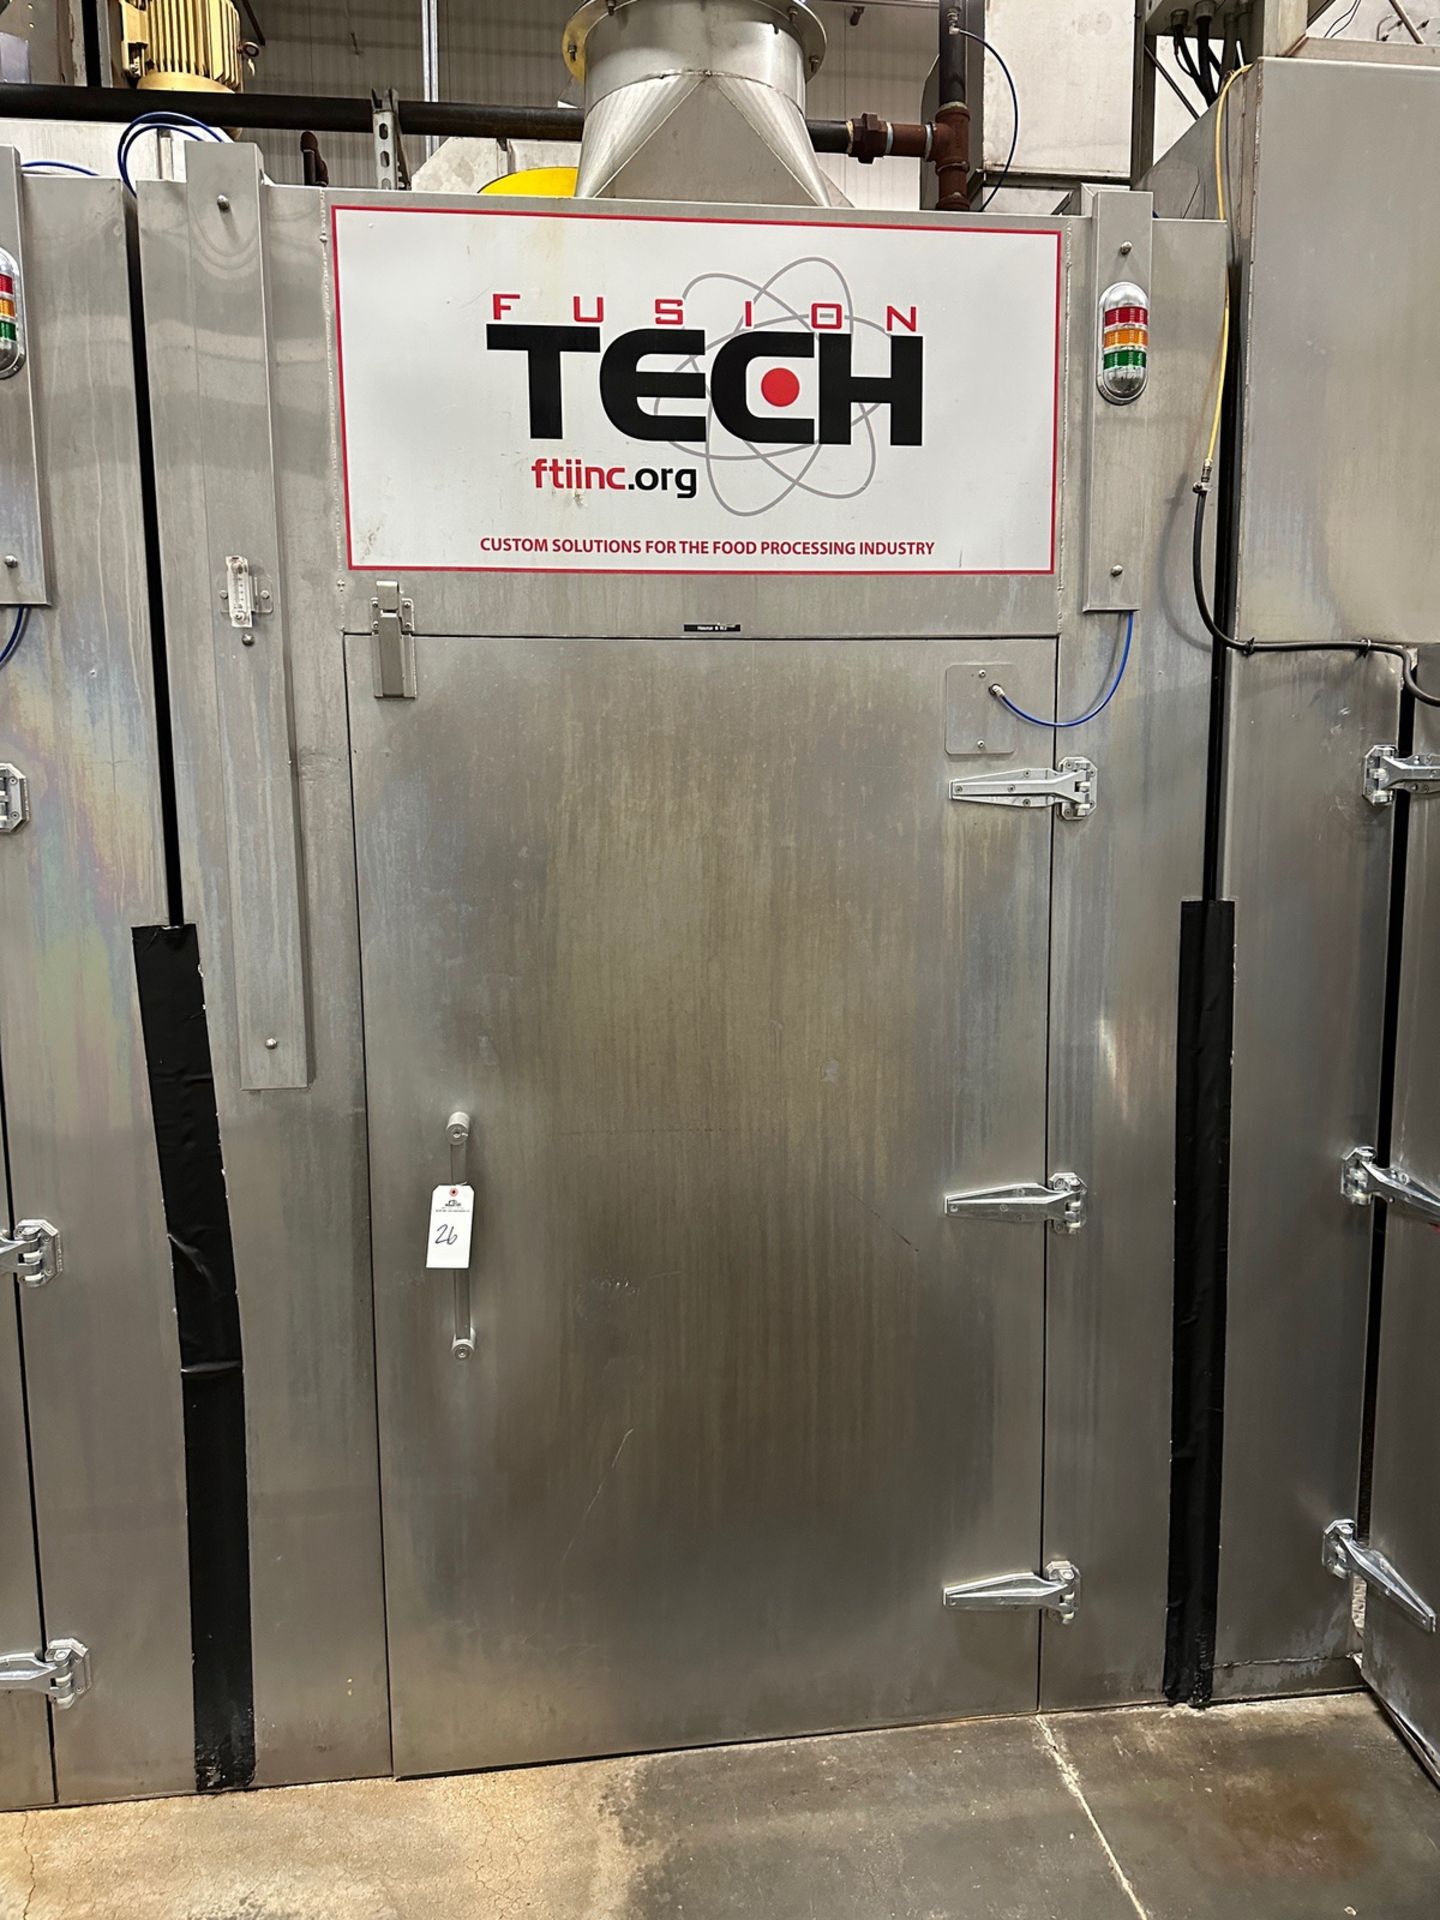 2018 Fusion Tech SM-04100-GP Oven / Smokehouse (Approx. 70" x 17'6" w 80" Wide Door) | Rig Fee $4500